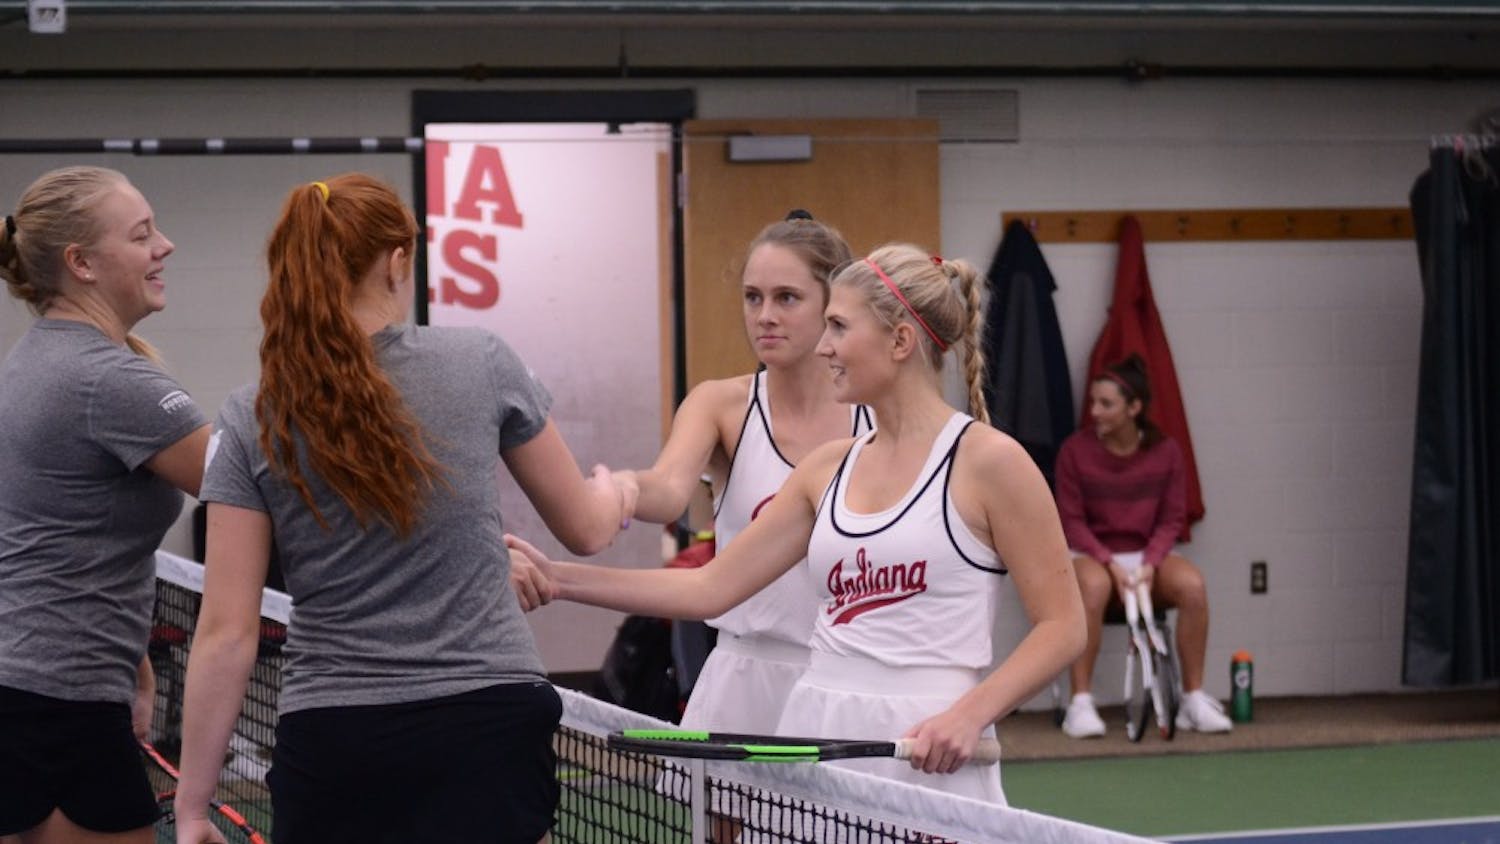 Sophomores Emma Love and Pauline Jahren shake hands with their opponents after their win of 7-5 at the IU Winter Invitational Tournament. The Hoosiers get set to play Western Michigan and Butler this Saturday to begin dual match play.